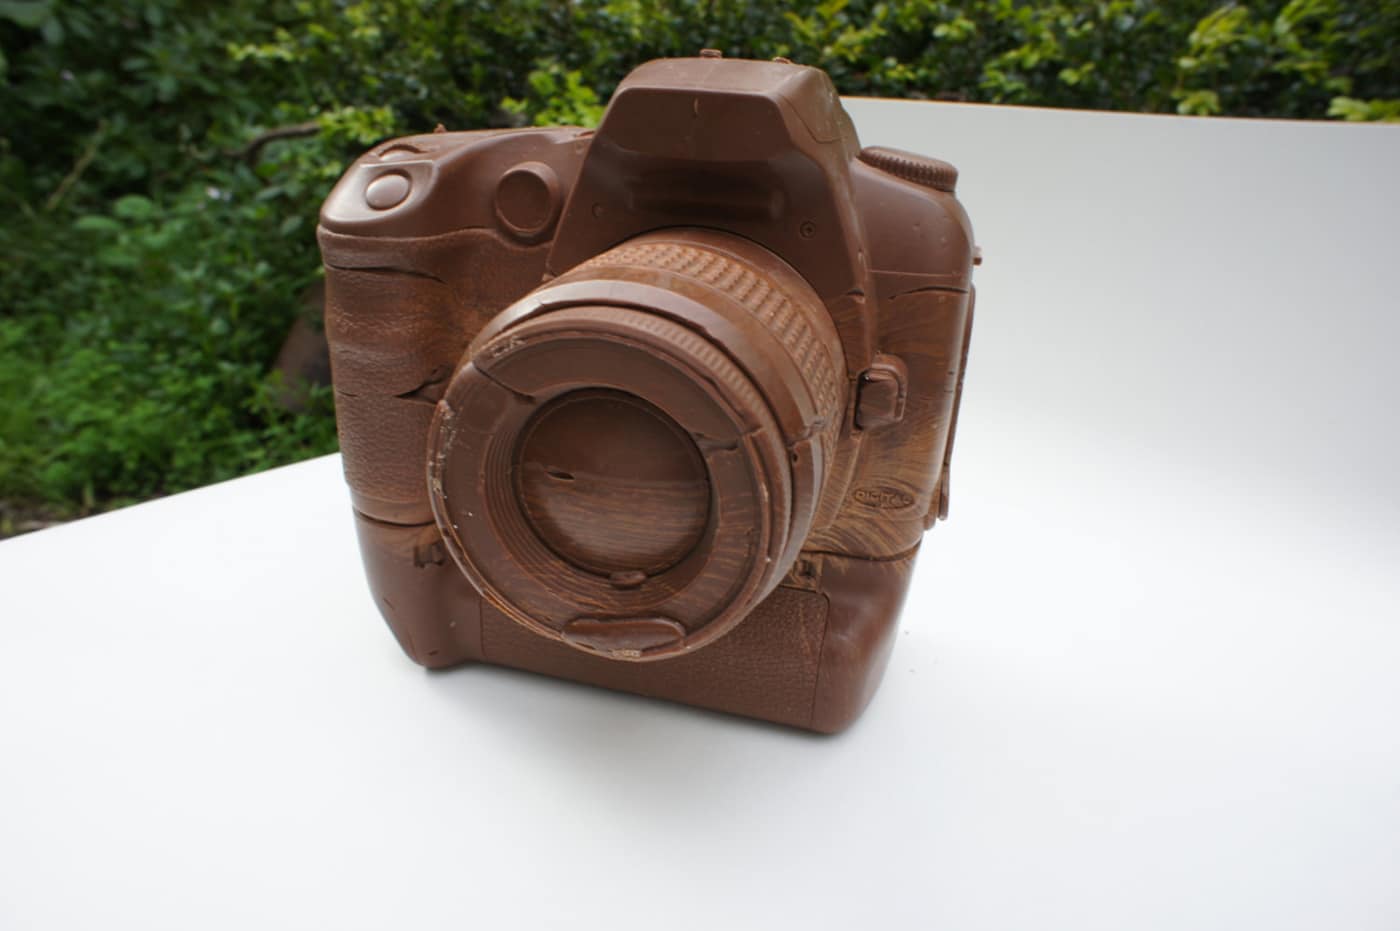 Canon D60 Camera (With Battery Grip) Created Out Of Solid Chocolate